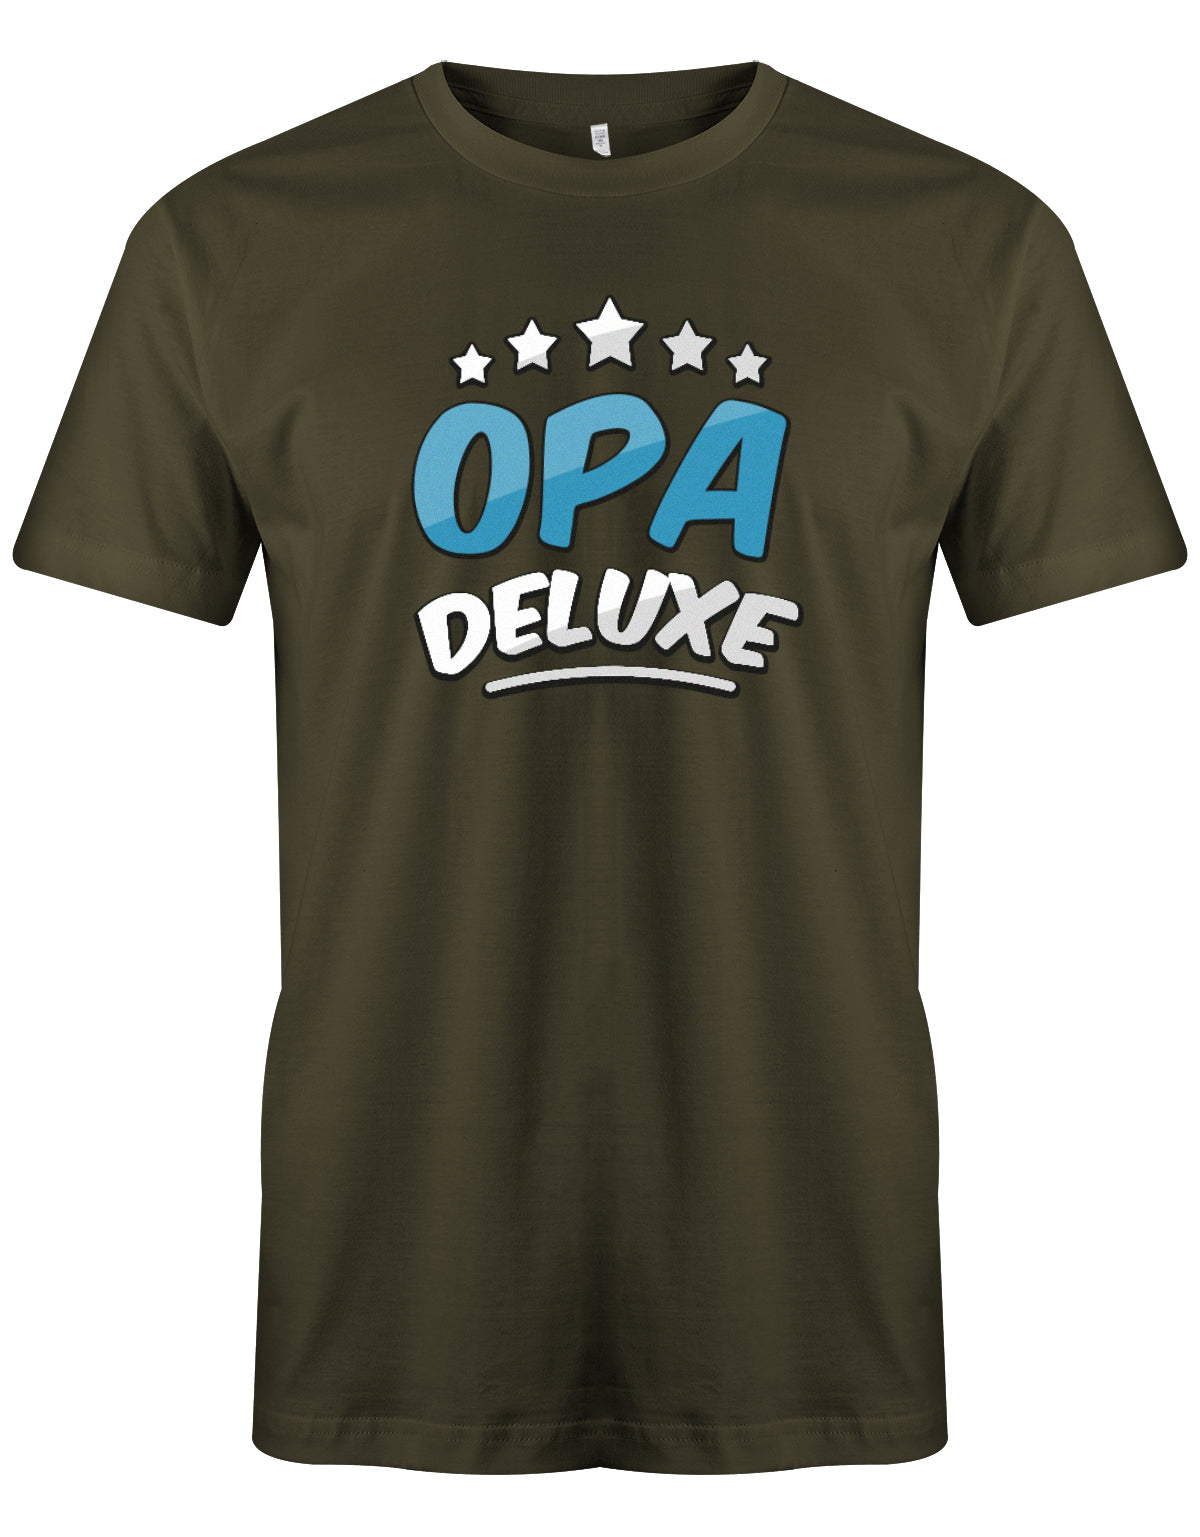 Opa T-Shirt – 5 Sterne Opa Deluxe. Army